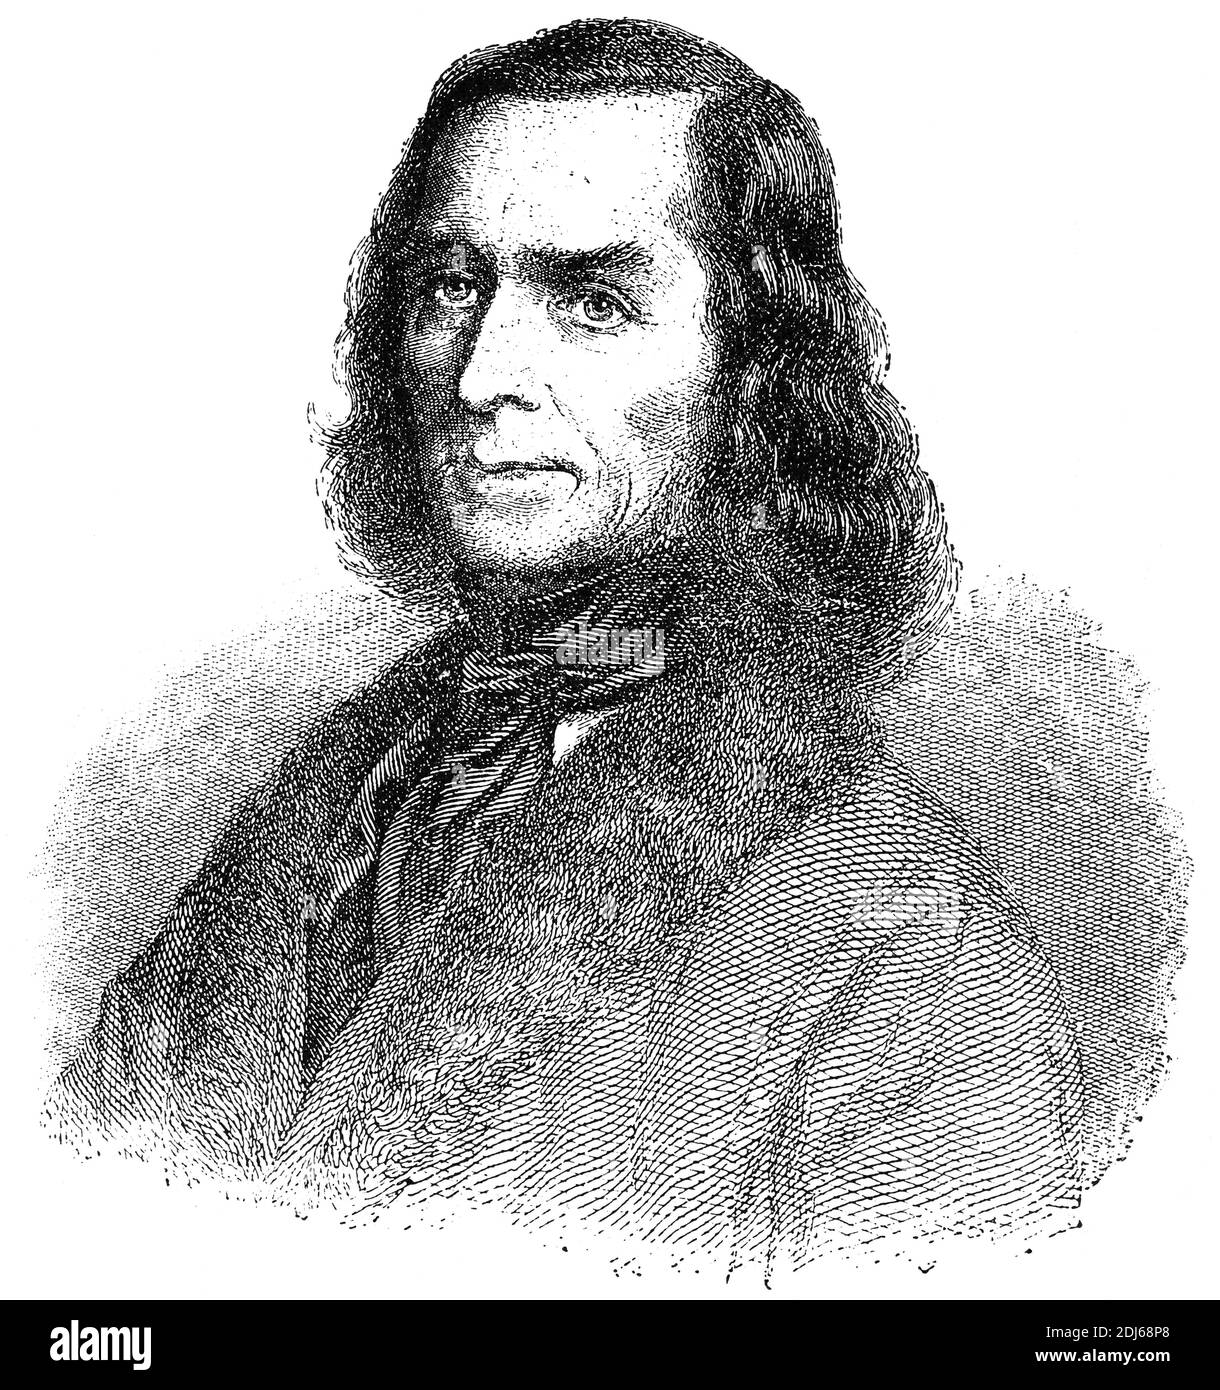 Portrait of Carl Friedrich Zoellner - a German composer and choir director. Illustration of the 19th century. Germany. White background. Stock Photo